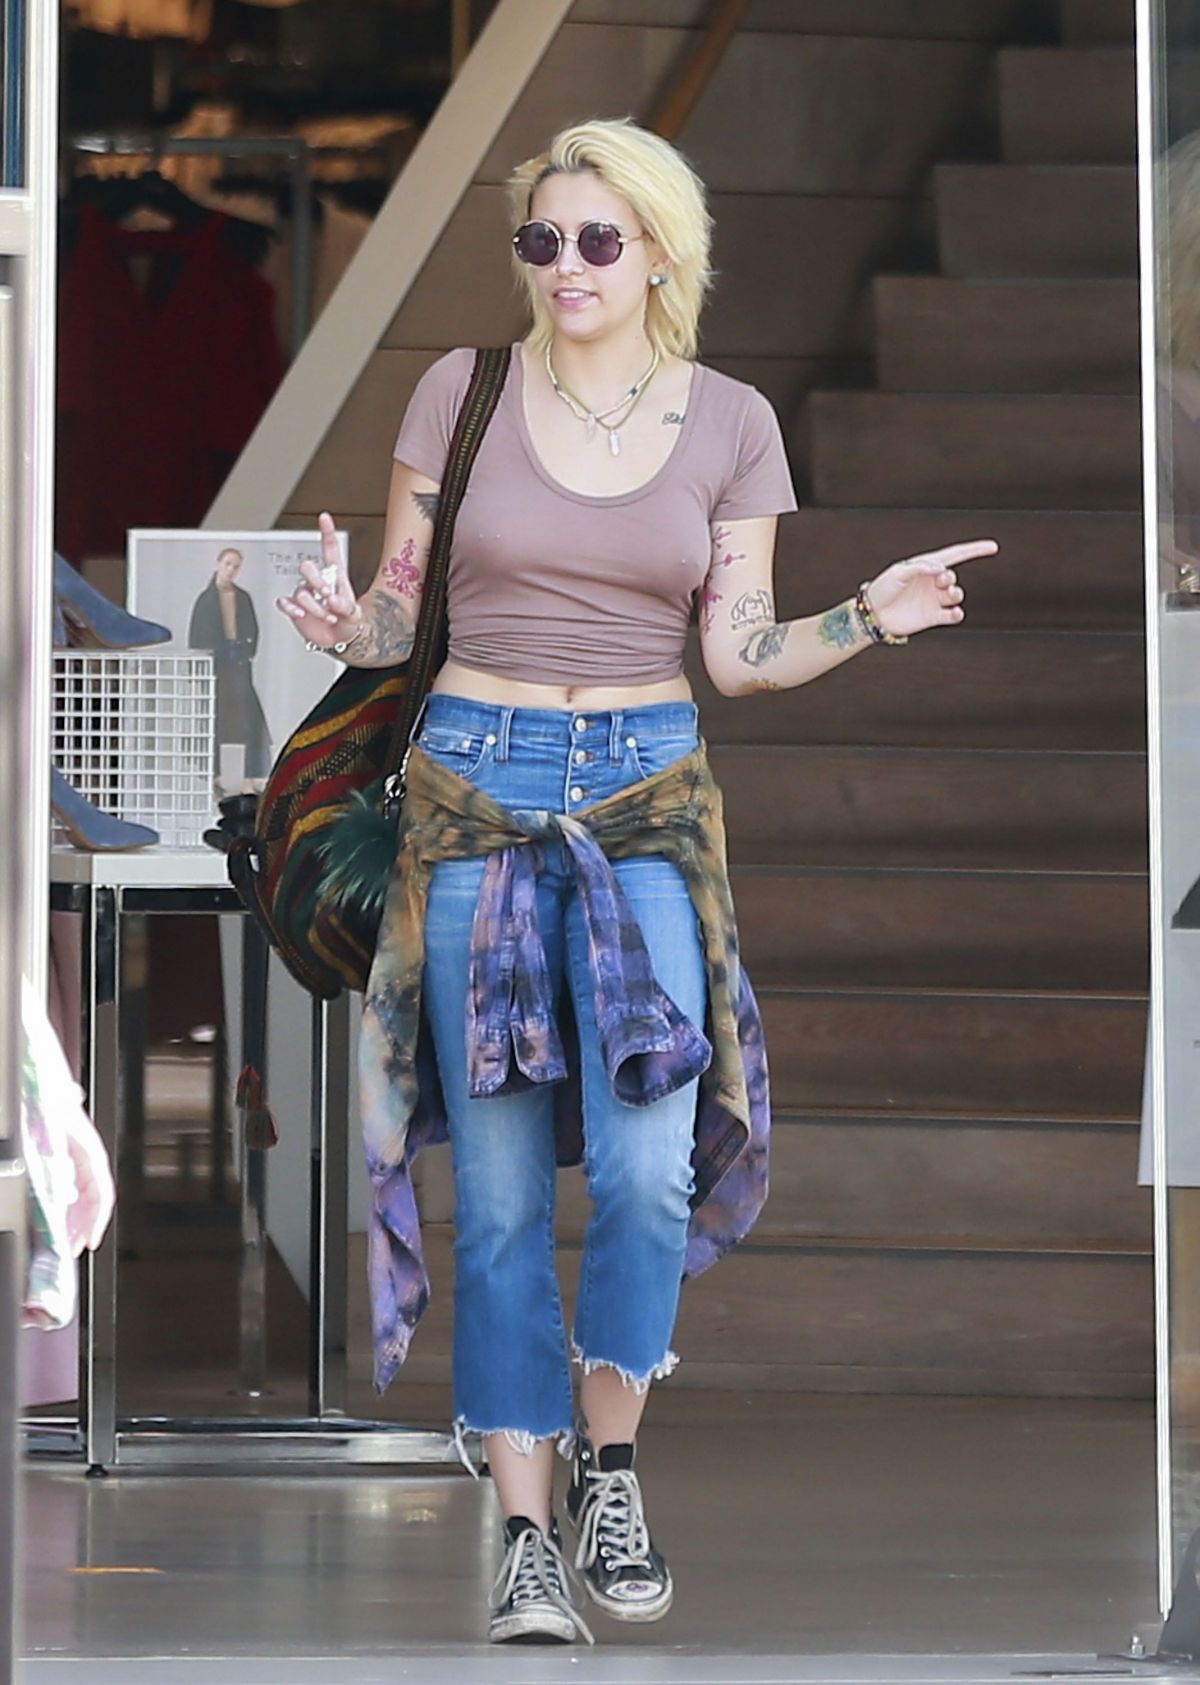 paris-jackson-out-shopping-in-los-angeles-02-15-2017_13.jpg